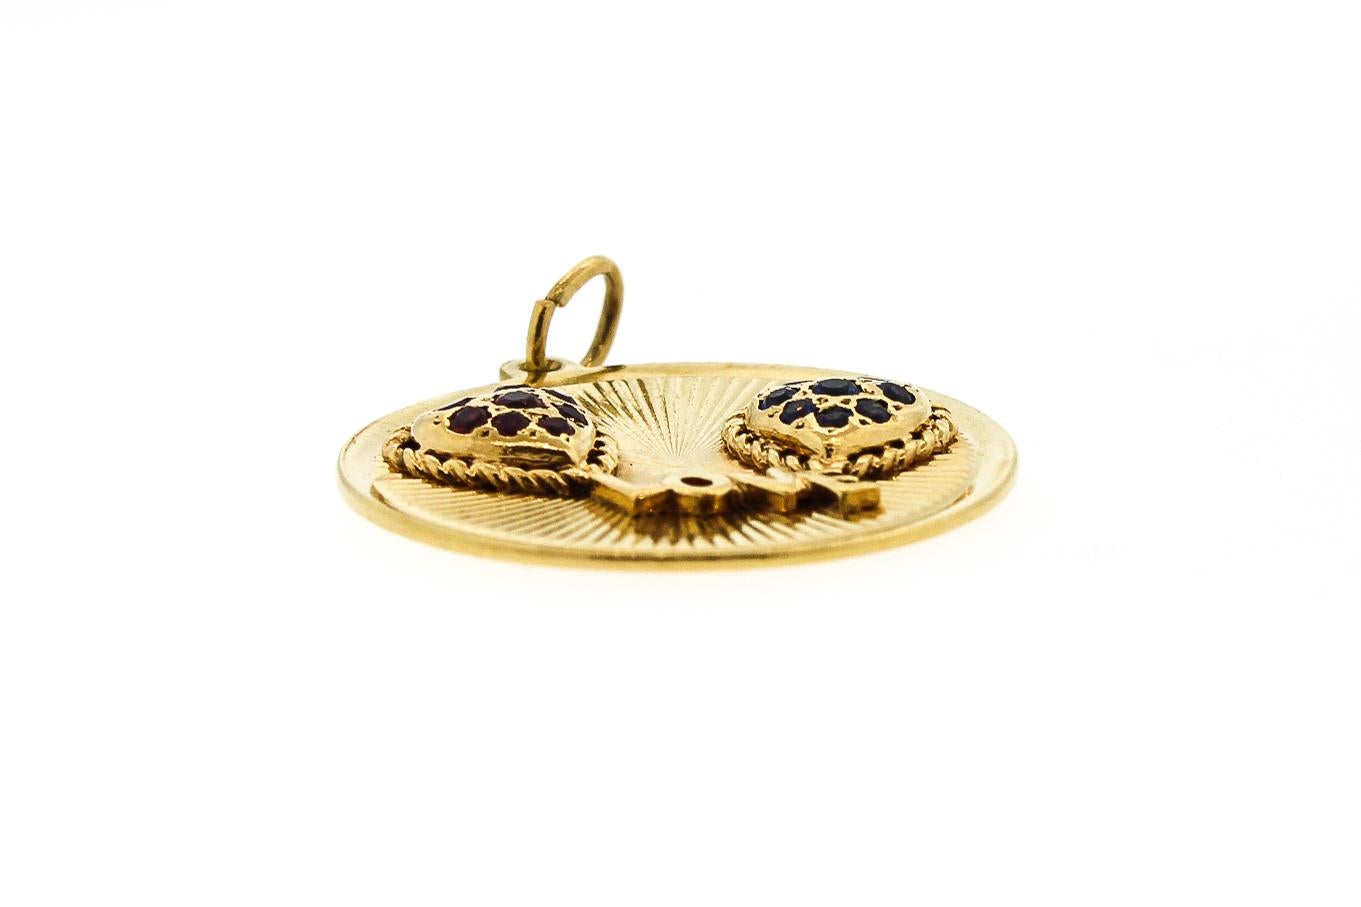 Puffy ruby and sapphire set hearts are connected by LOVE on this 14k yellow gold disc charm by Dankner. The charm is about 1.1 inches in diameter and the front is ridged in texture. The charm is whimsical like two balloons connected together by